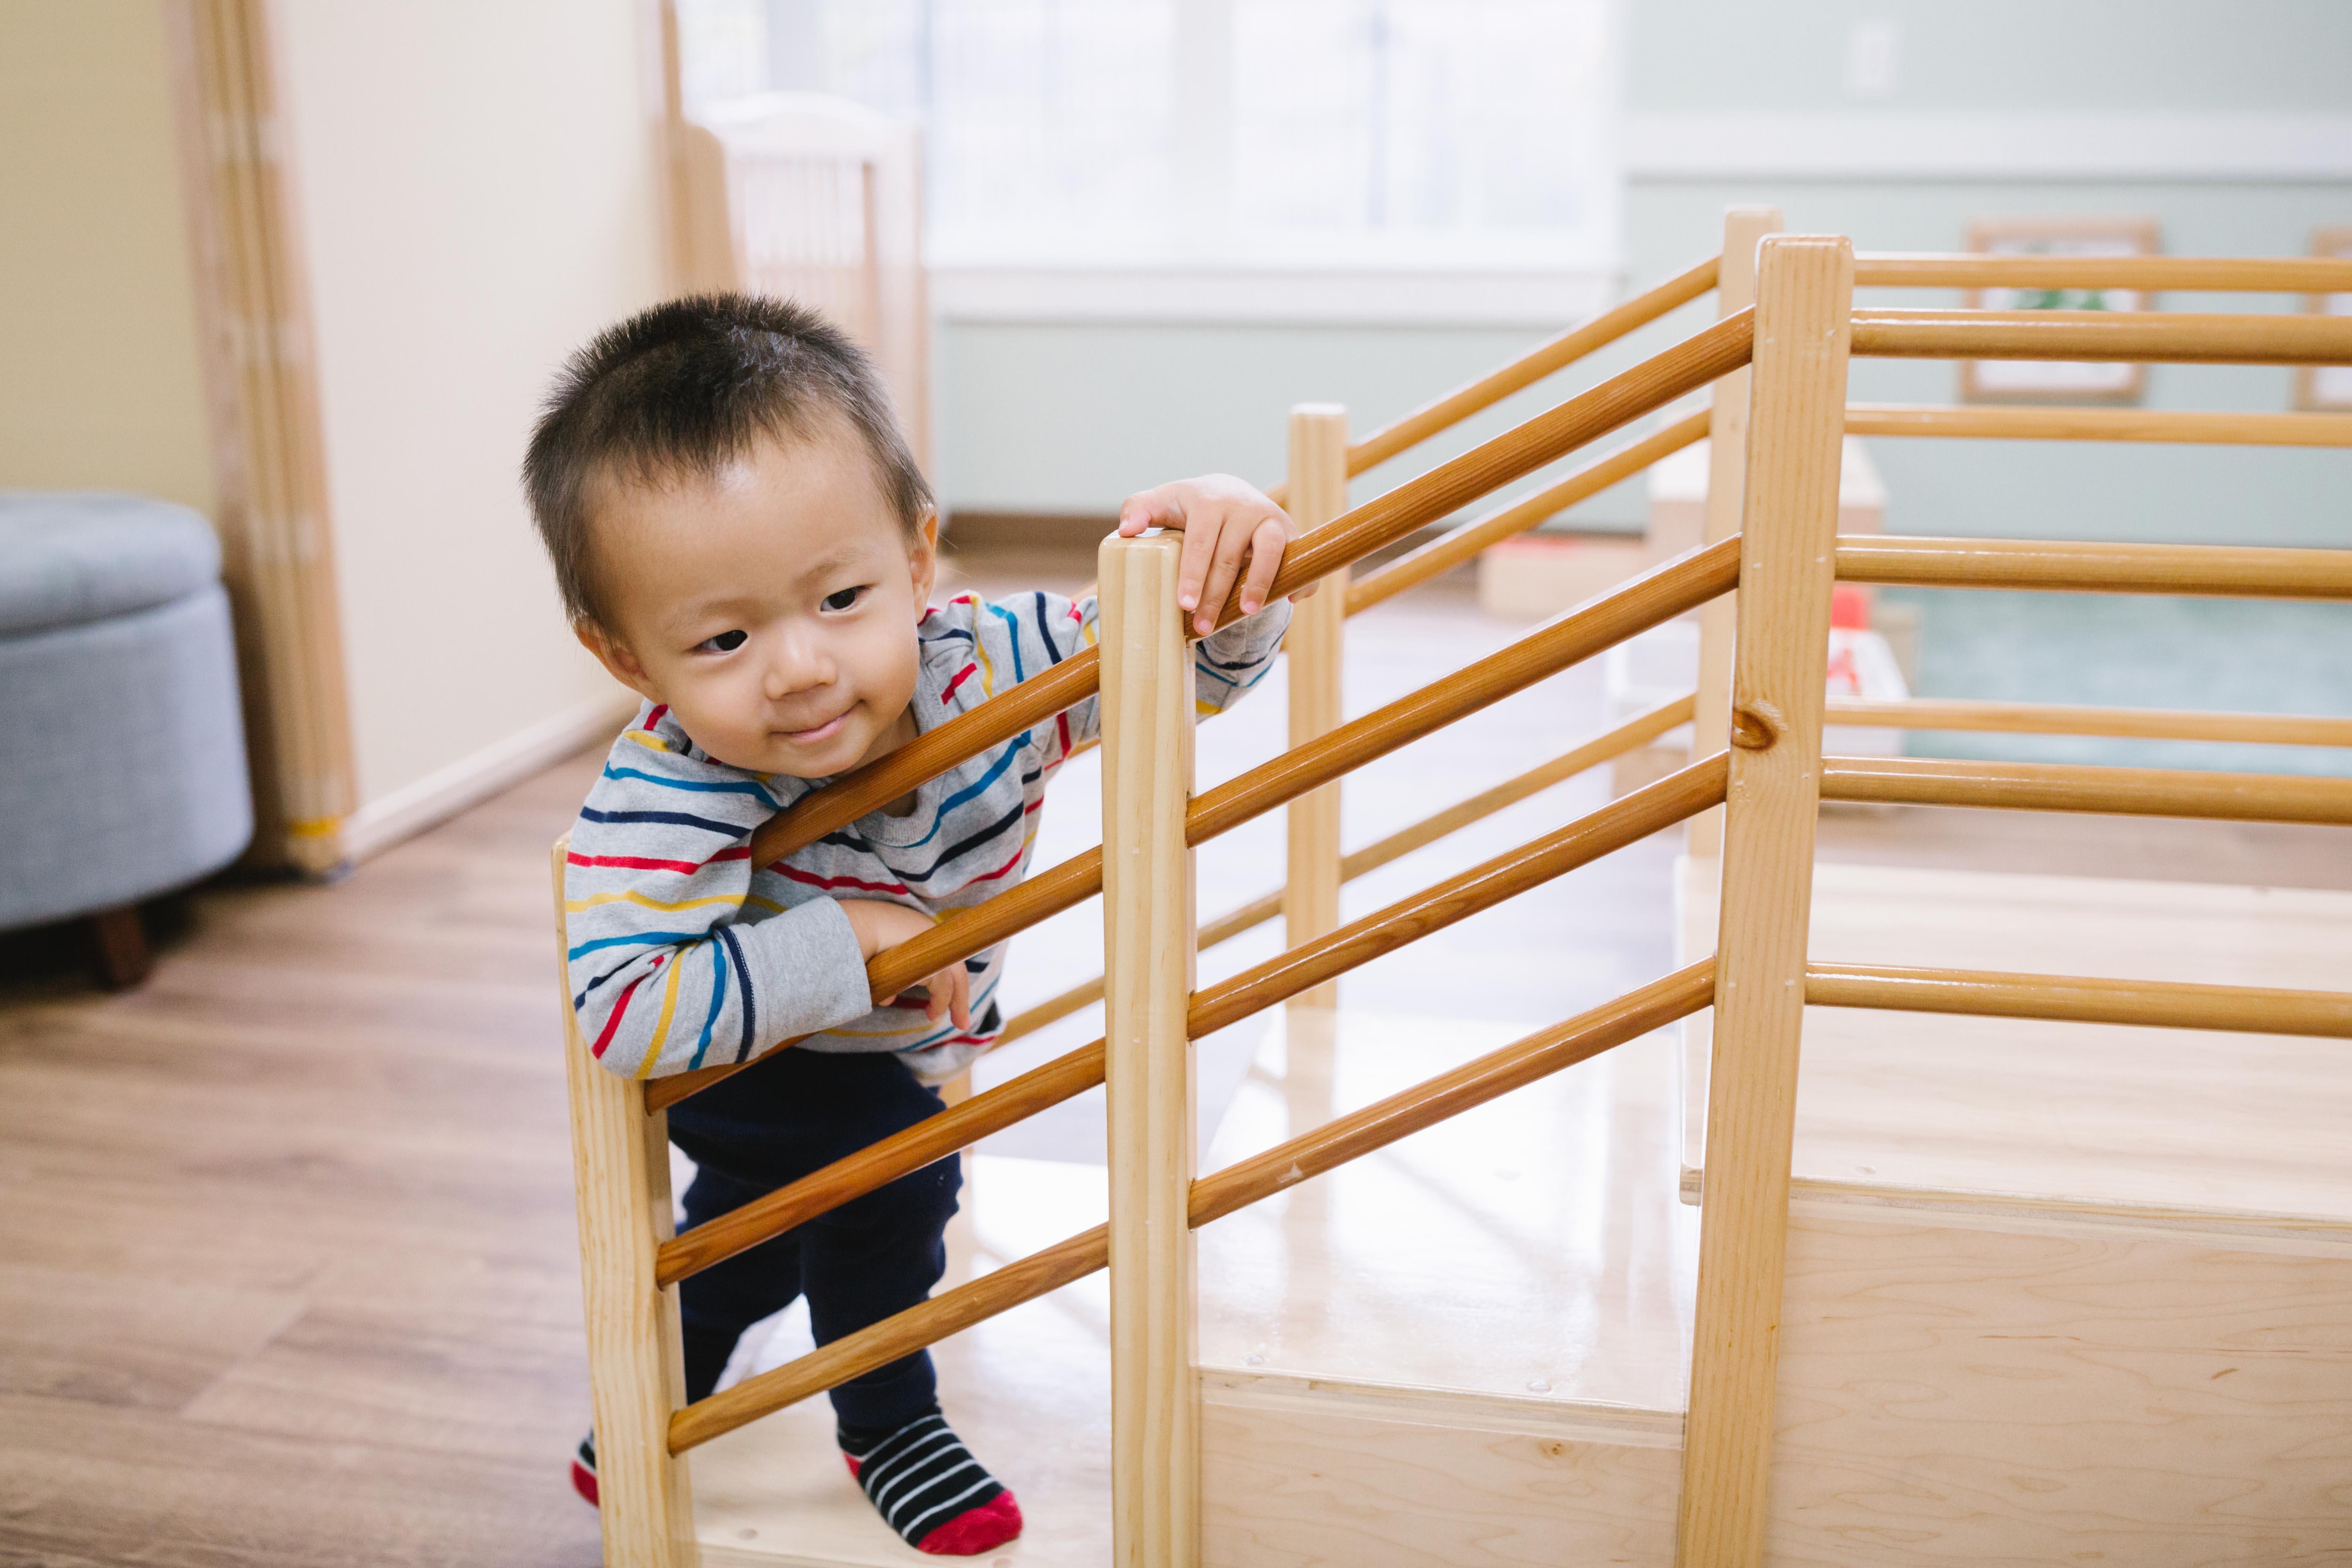 Asian infant on stairs